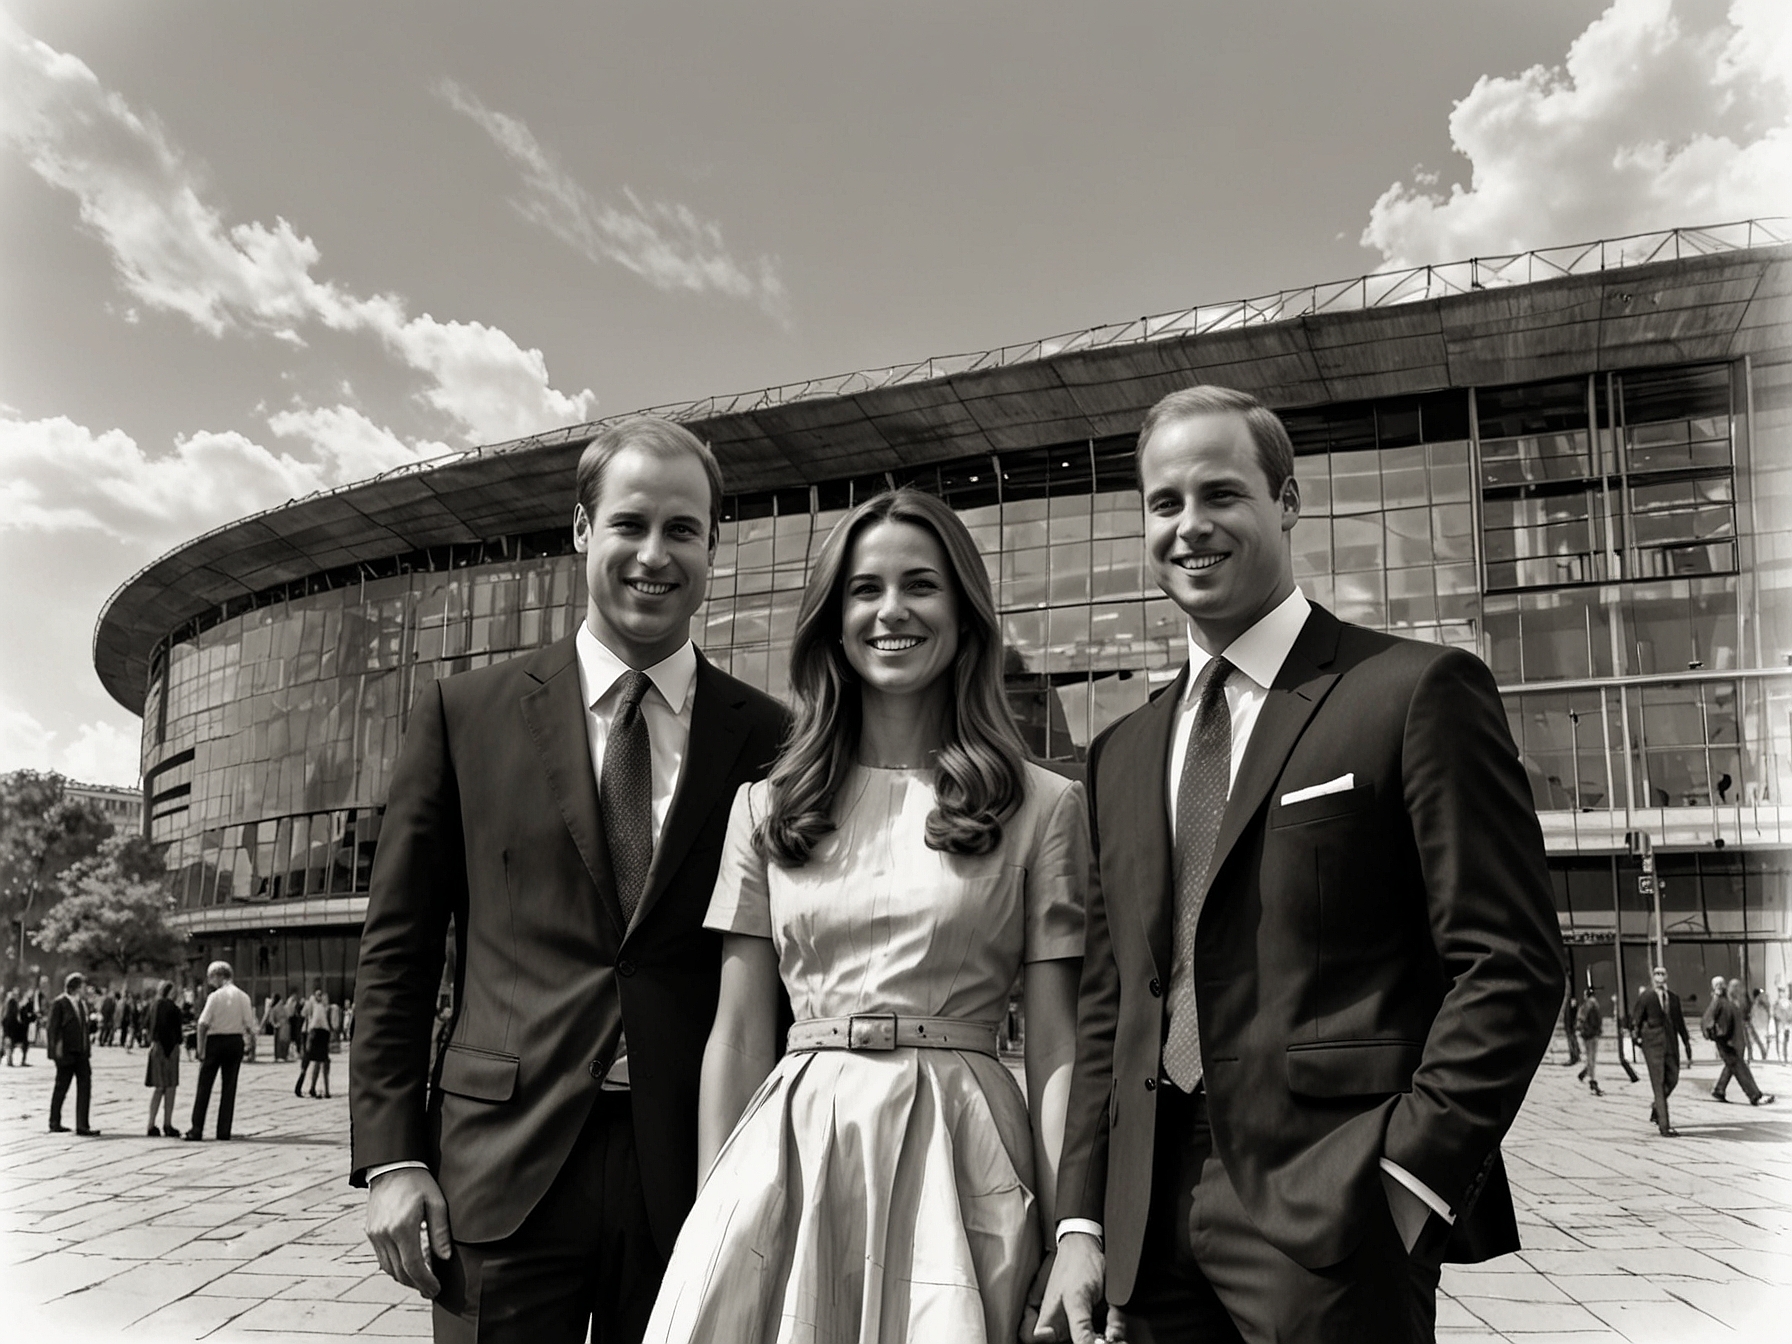 Prince William and Danish royals at Frankfurt Arena symbolizing international unity and diplomatic relations. The arena's impressive architecture underscores the significance of the royal engagement.